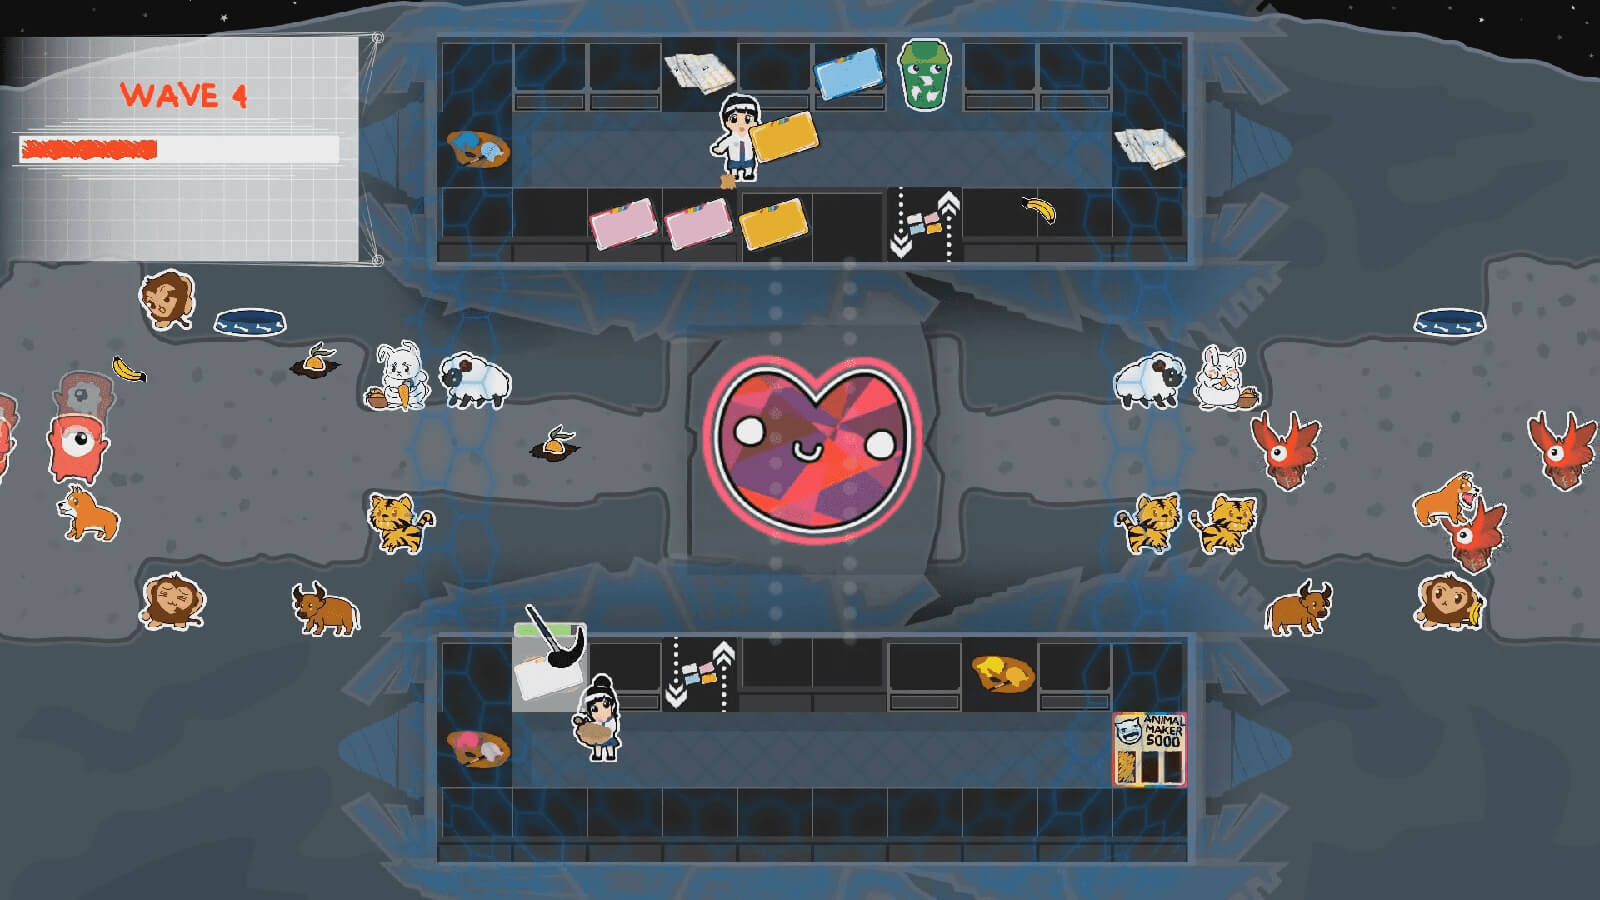 In a top-down underground game level, vibrant animal stickers surround a large, central heart shape with a smiley face.